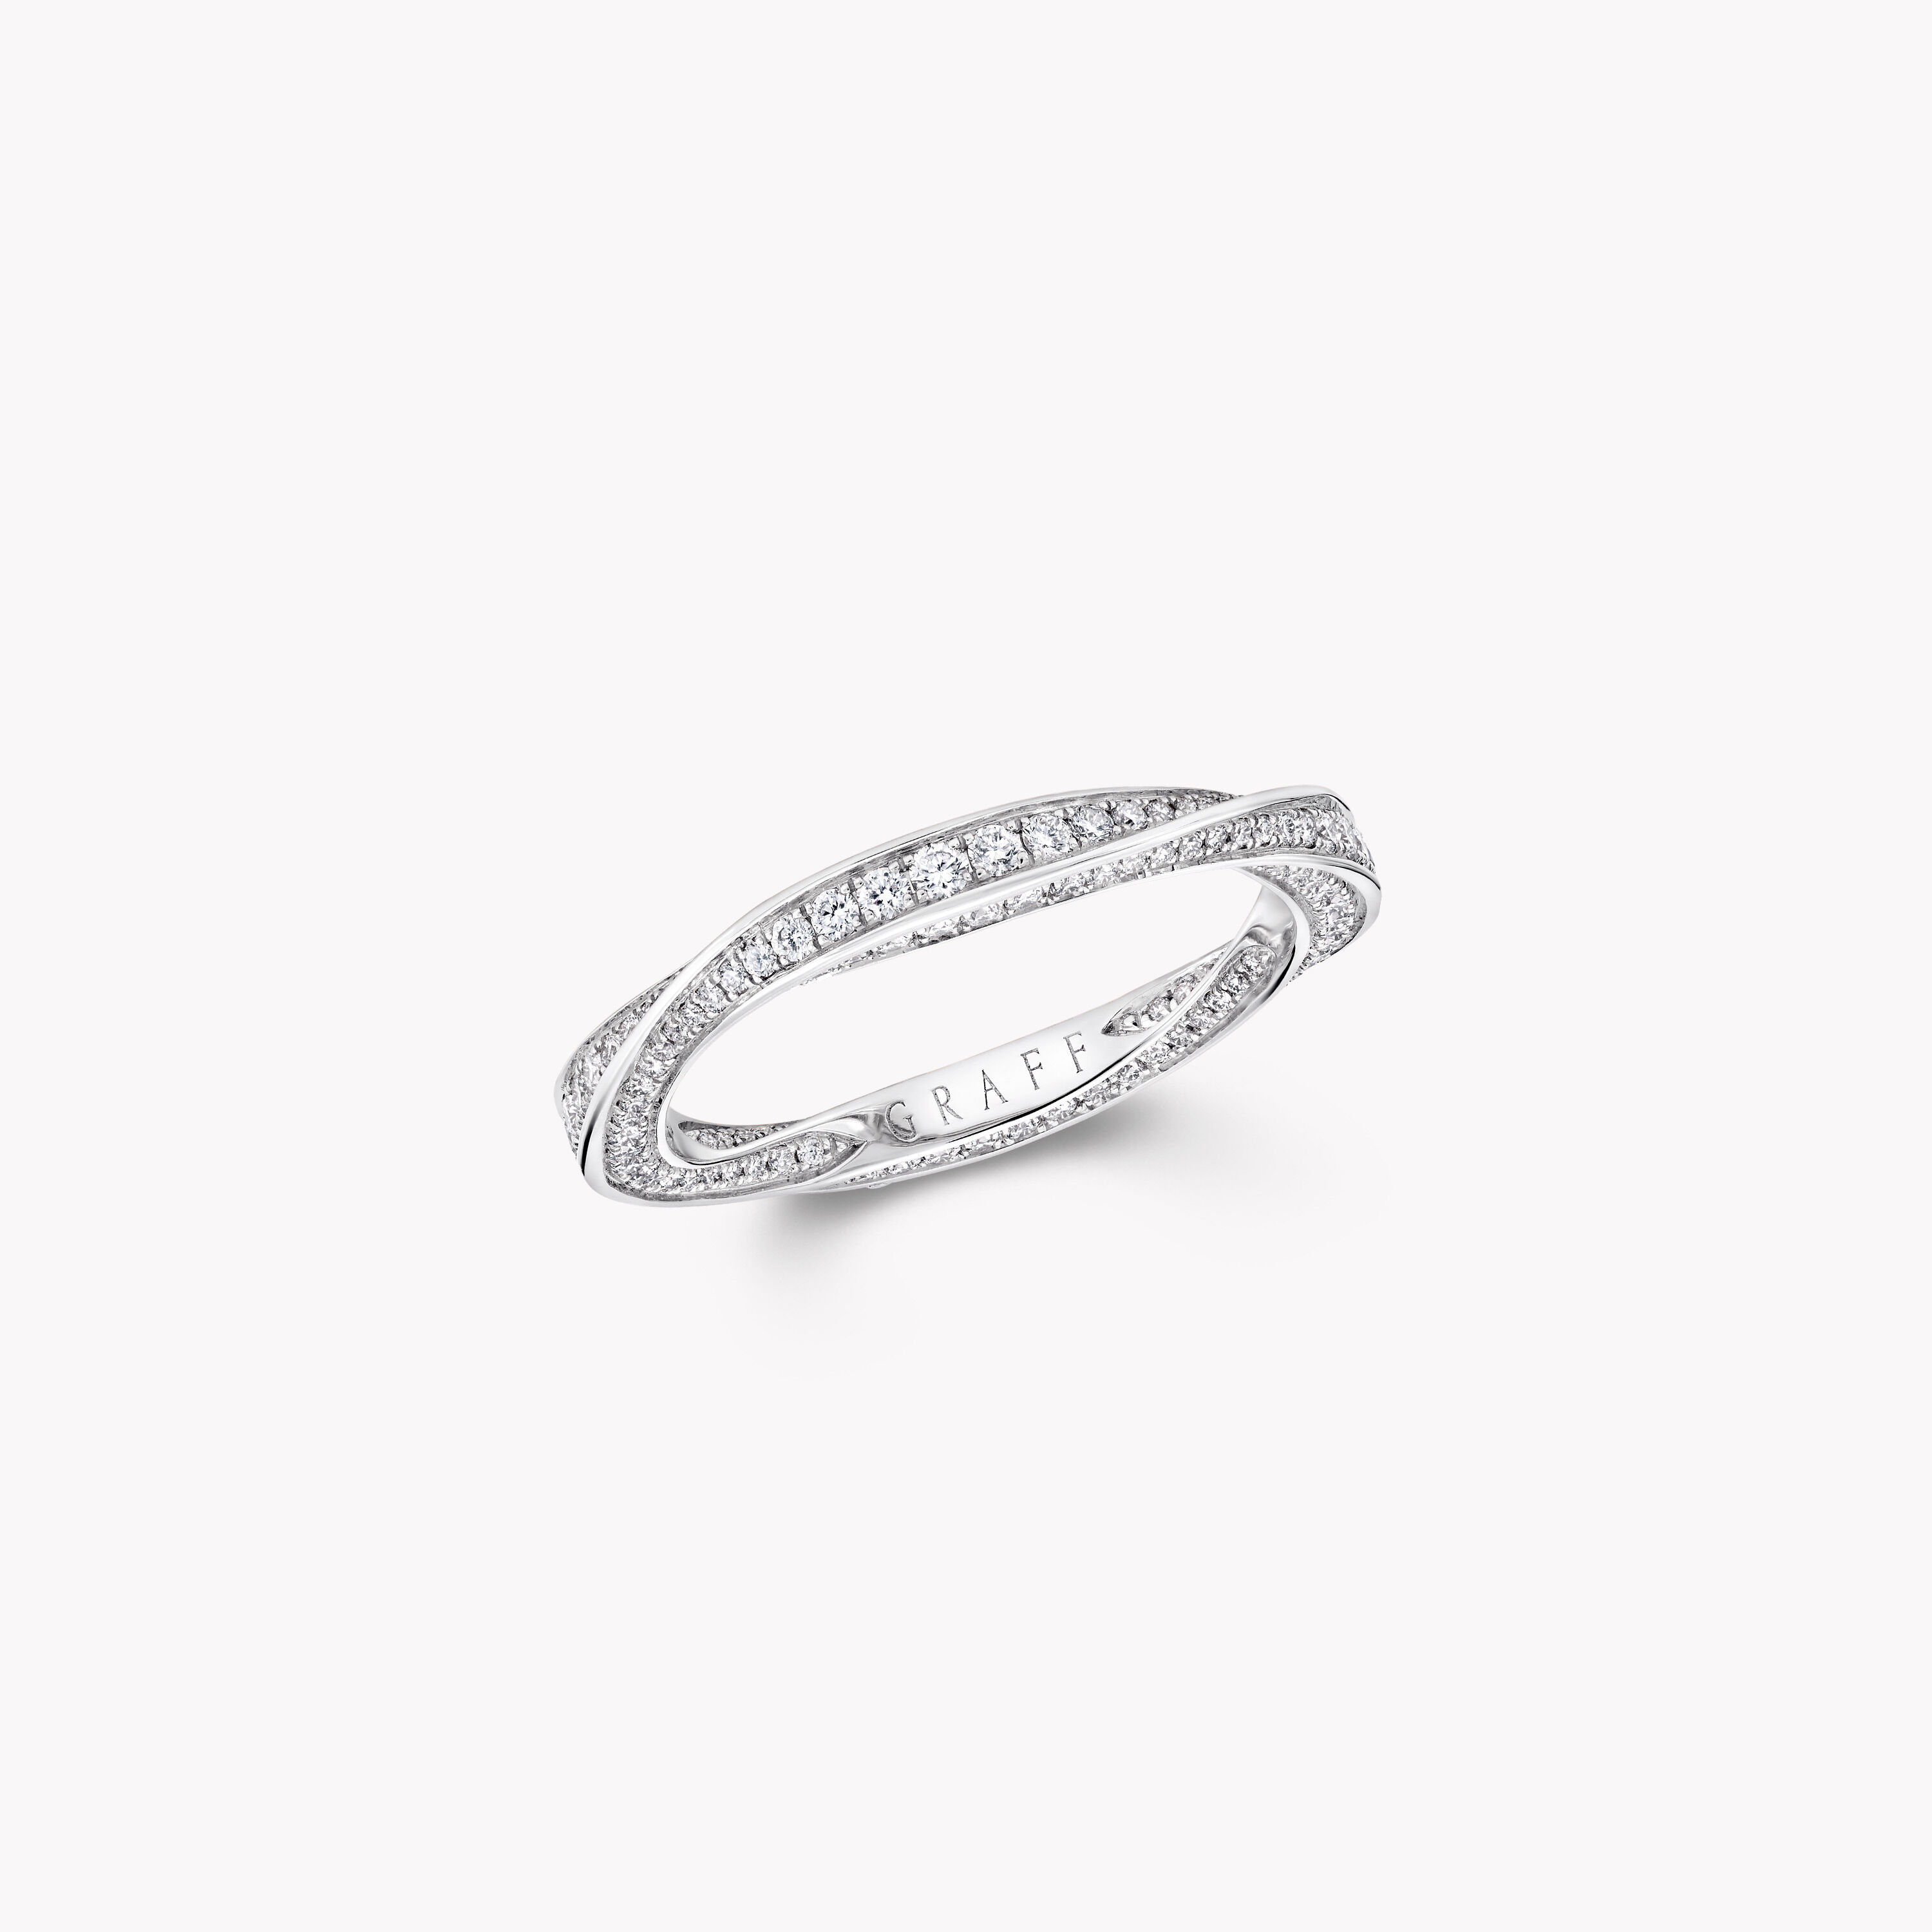 Spiral diamond ring 18k fairtrade gold by Pascale James | Finematter